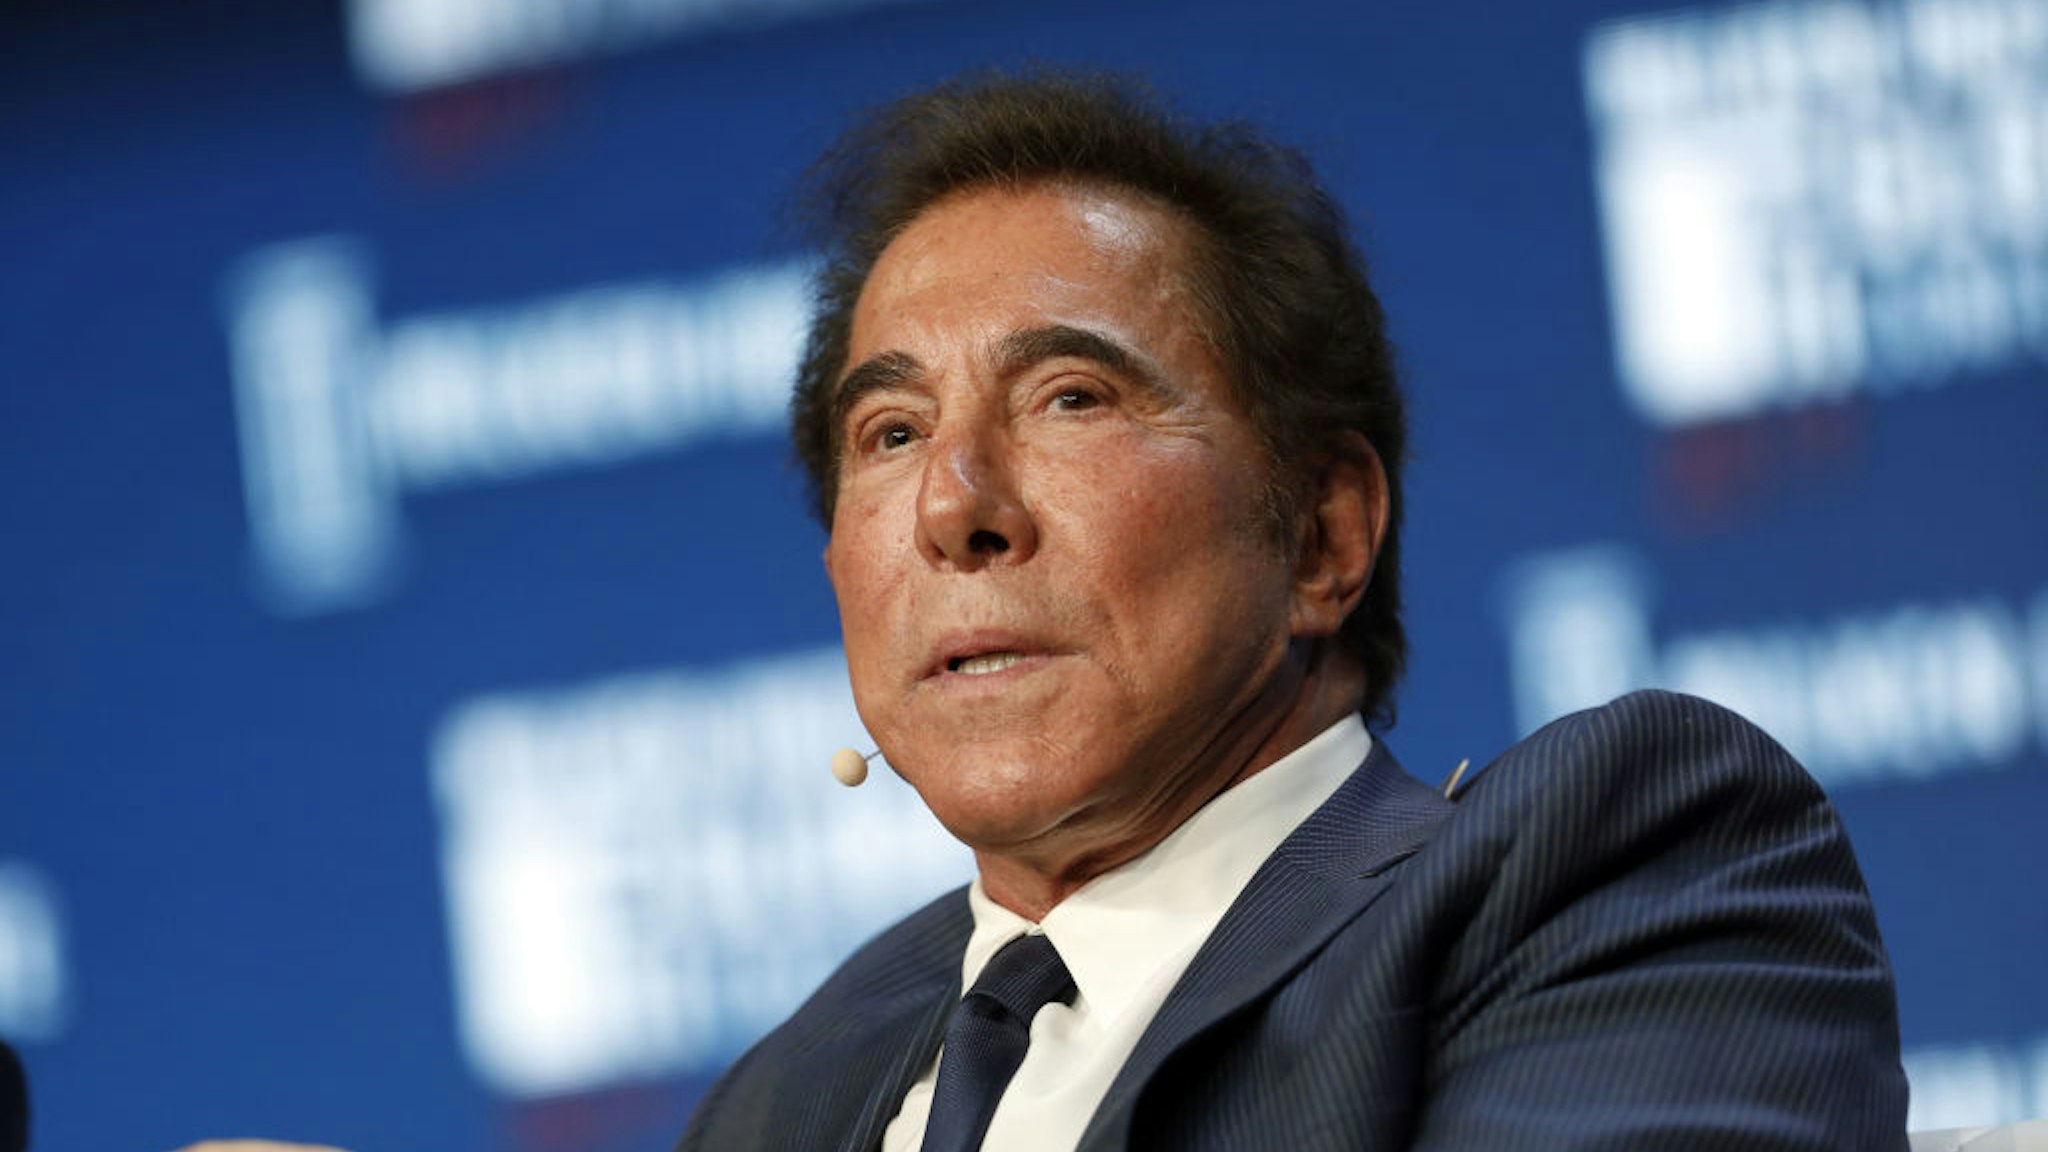 Billionaire Steve Wynn, chairman and chief executive officer of Wynn Resorts Ltd., speaks during the Milken Institute Global Conference in Beverly Hills, California, U.S., on Wednesday, May 3, 2017.